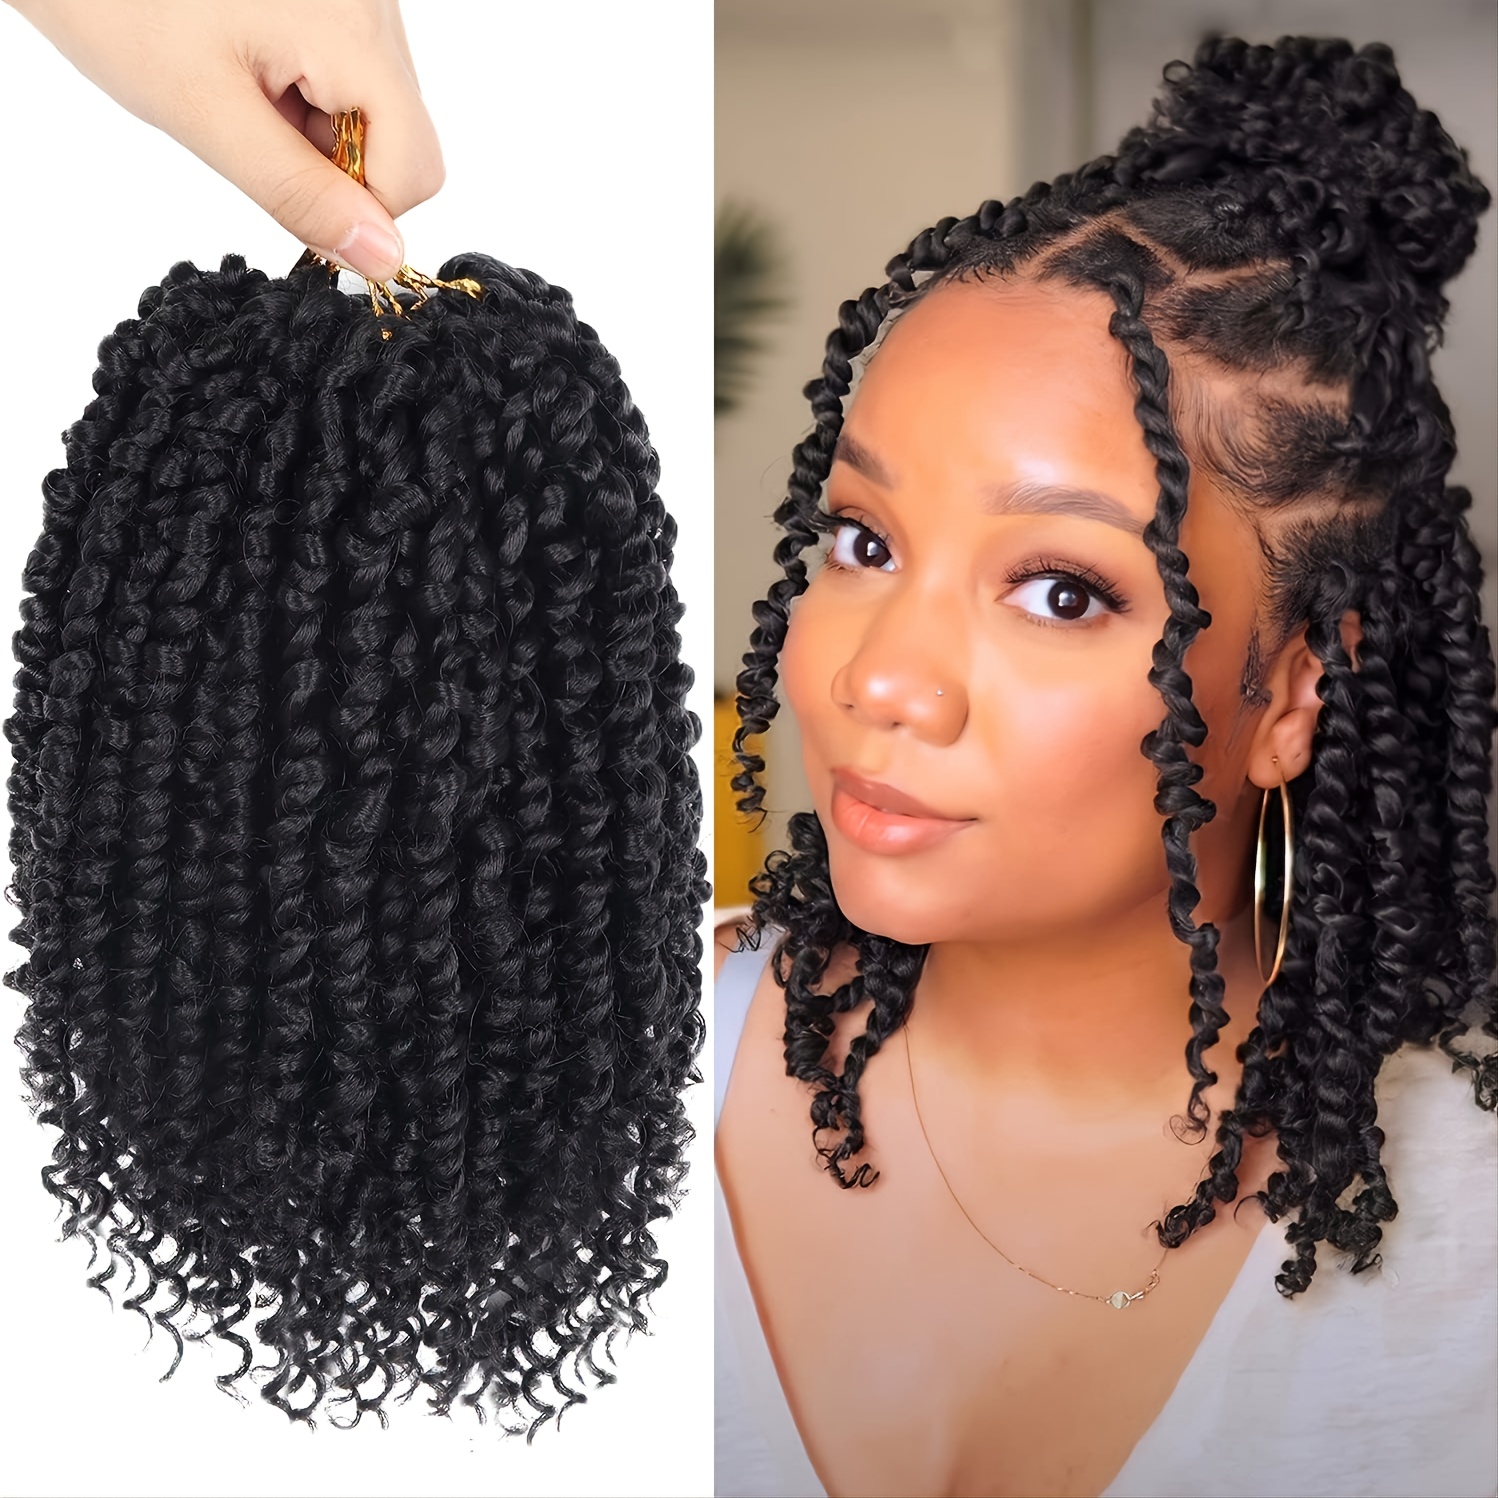 18 Inch 8Packs Senegalese Twist Hair Crochet Braids 30Stands/Pack Synthetic  Braiding Hair Extensions for Black Women… (18 Inch, t30)